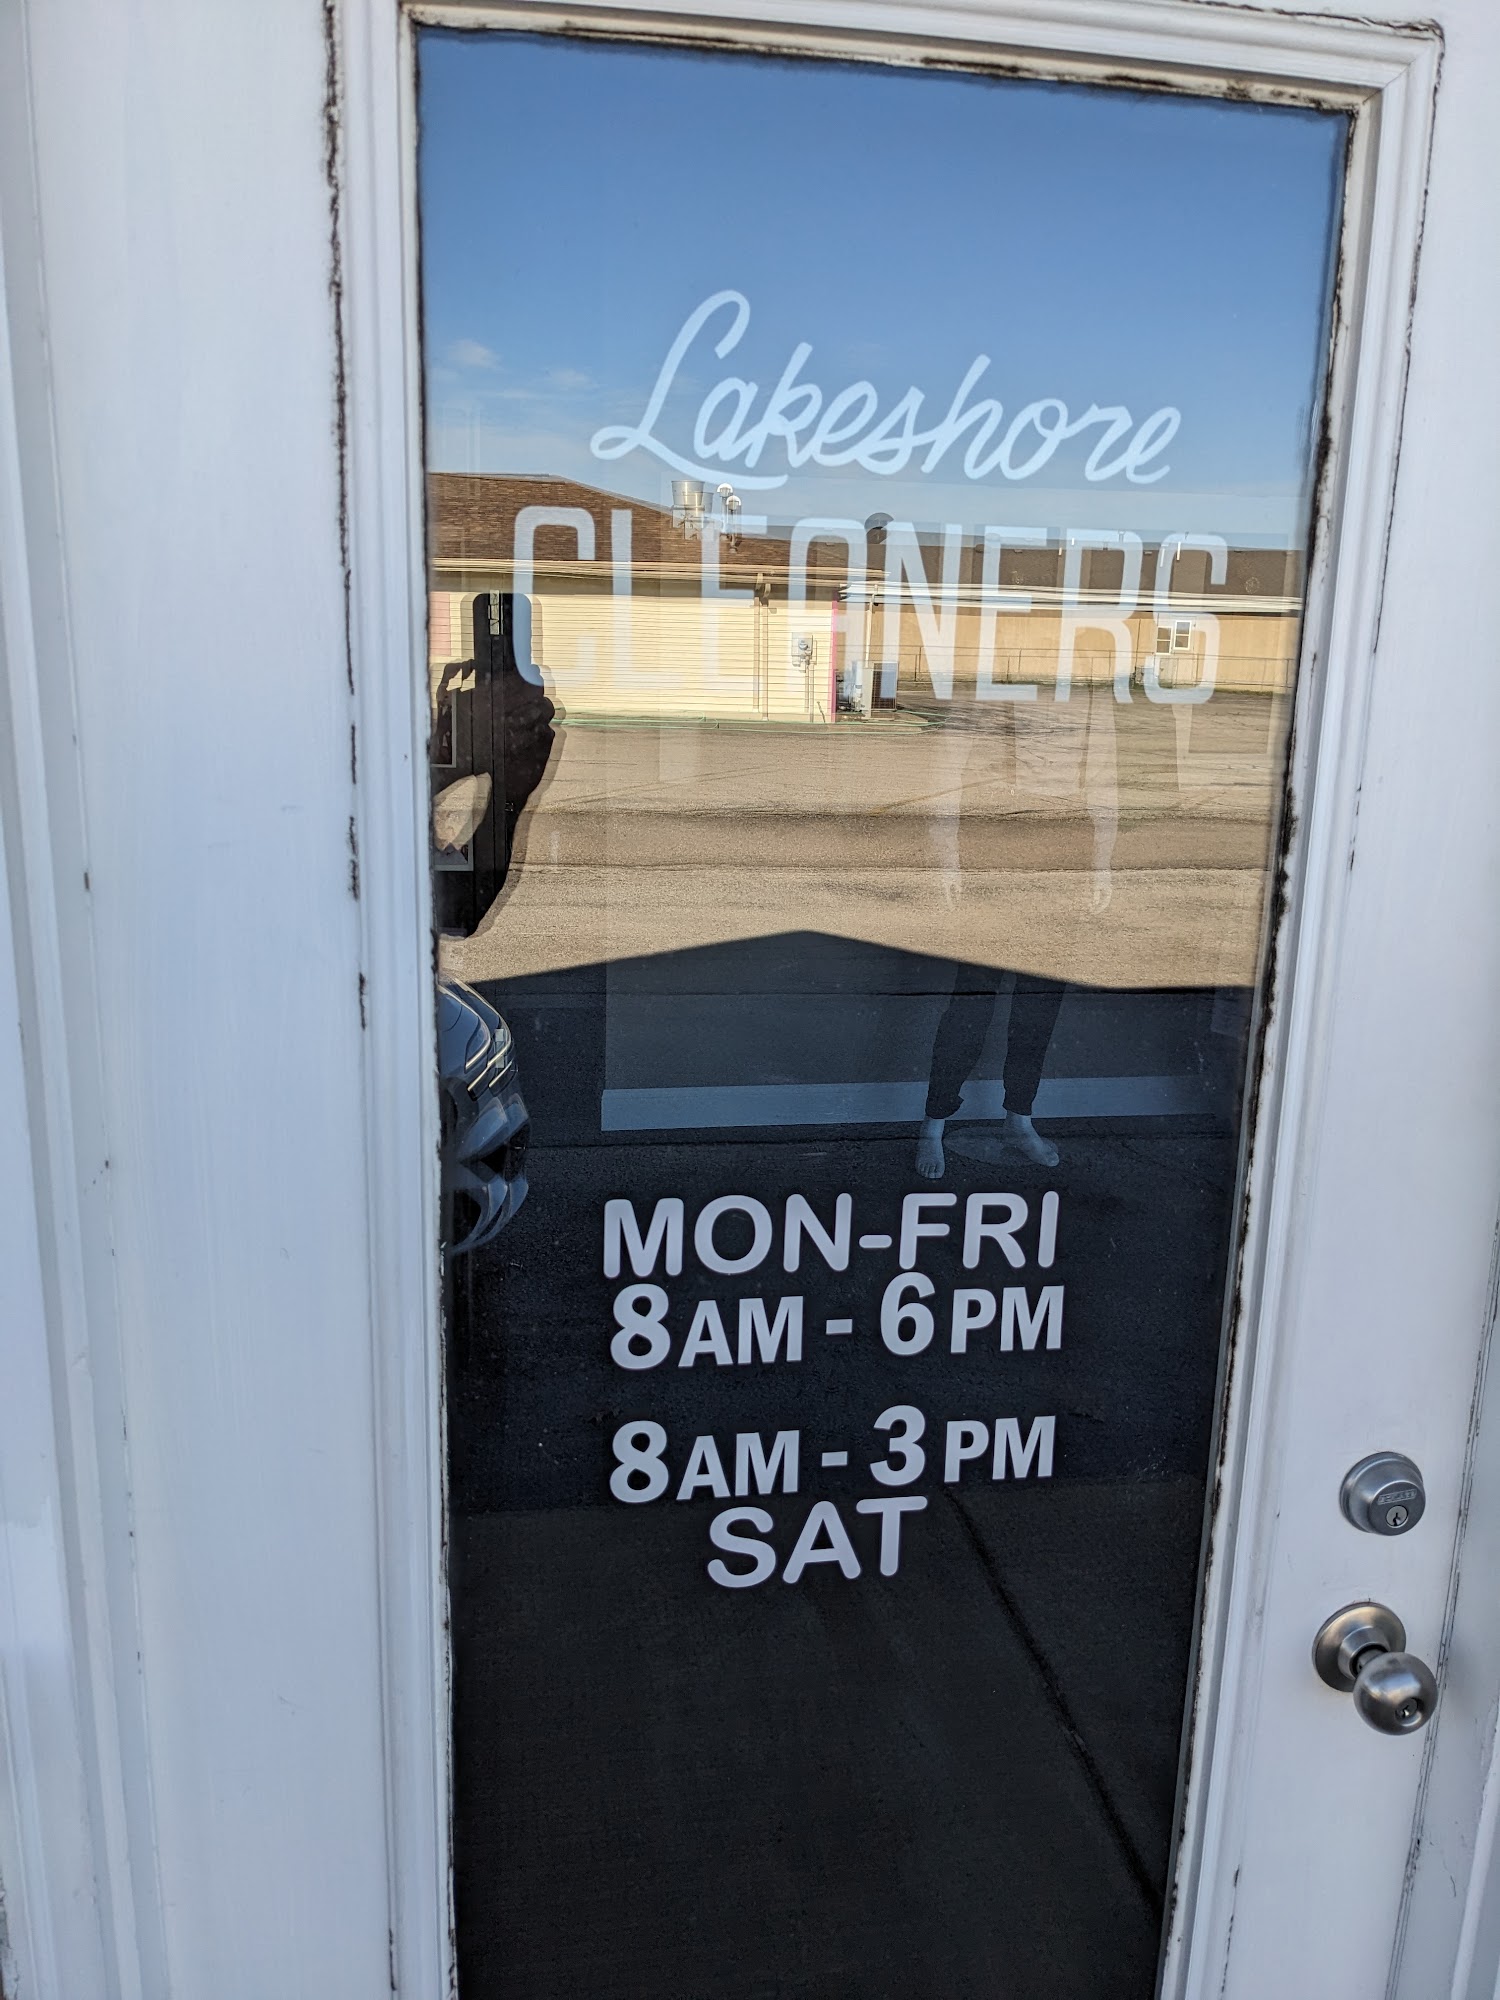 Lakeshore Cleaners 5846 Cleveland Ave, Stevensville Michigan 49127